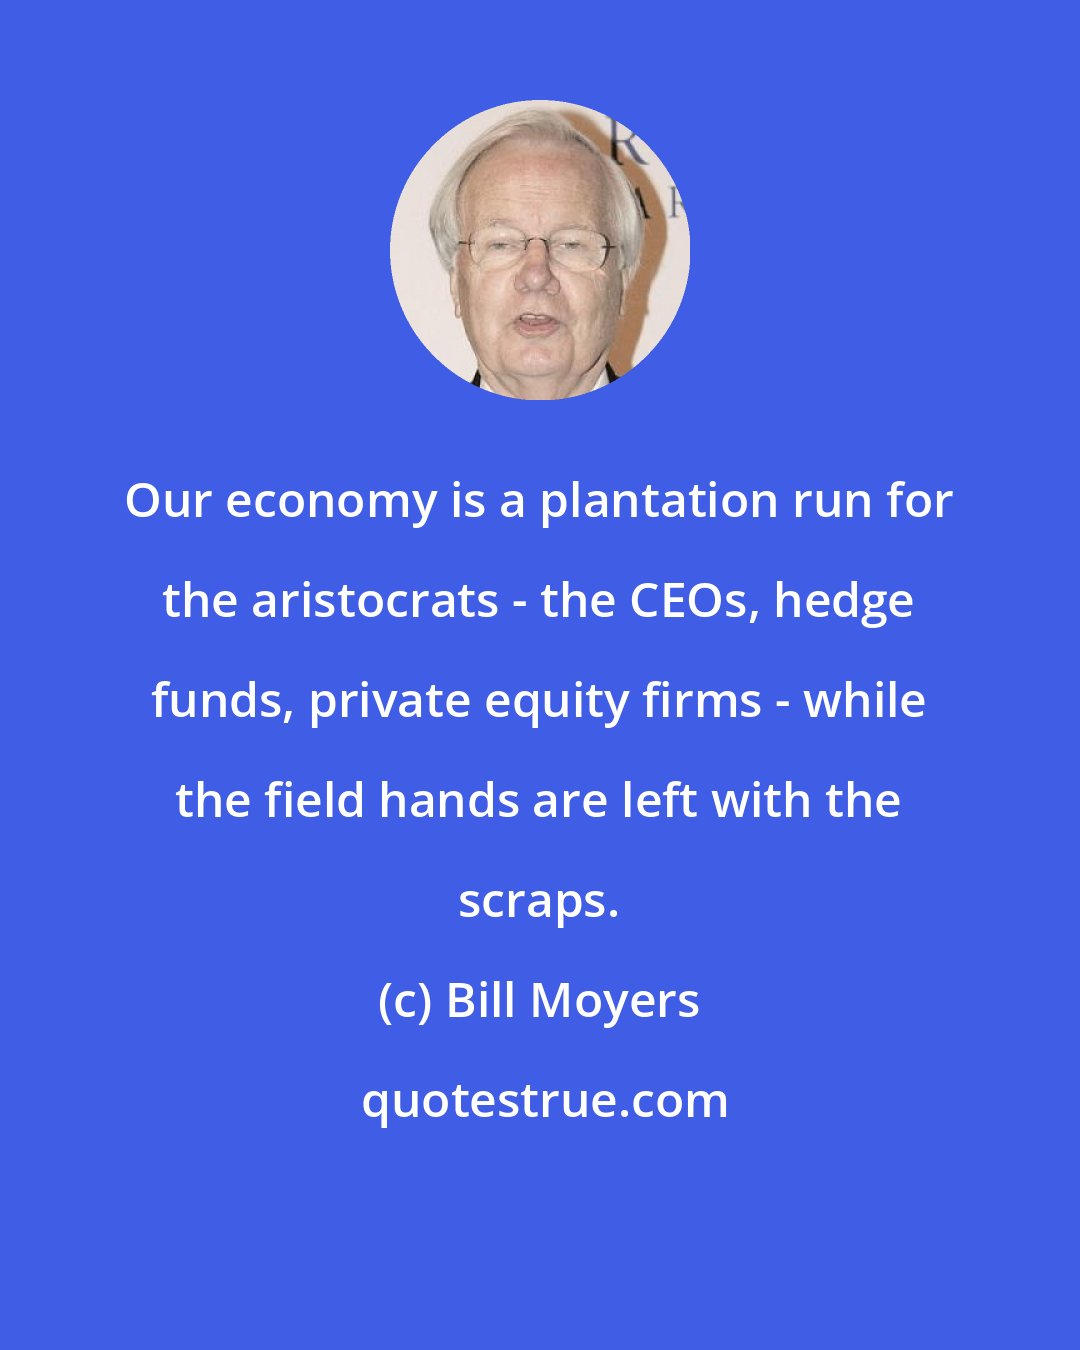 Bill Moyers: Our economy is a plantation run for the aristocrats - the CEOs, hedge funds, private equity firms - while the field hands are left with the scraps.